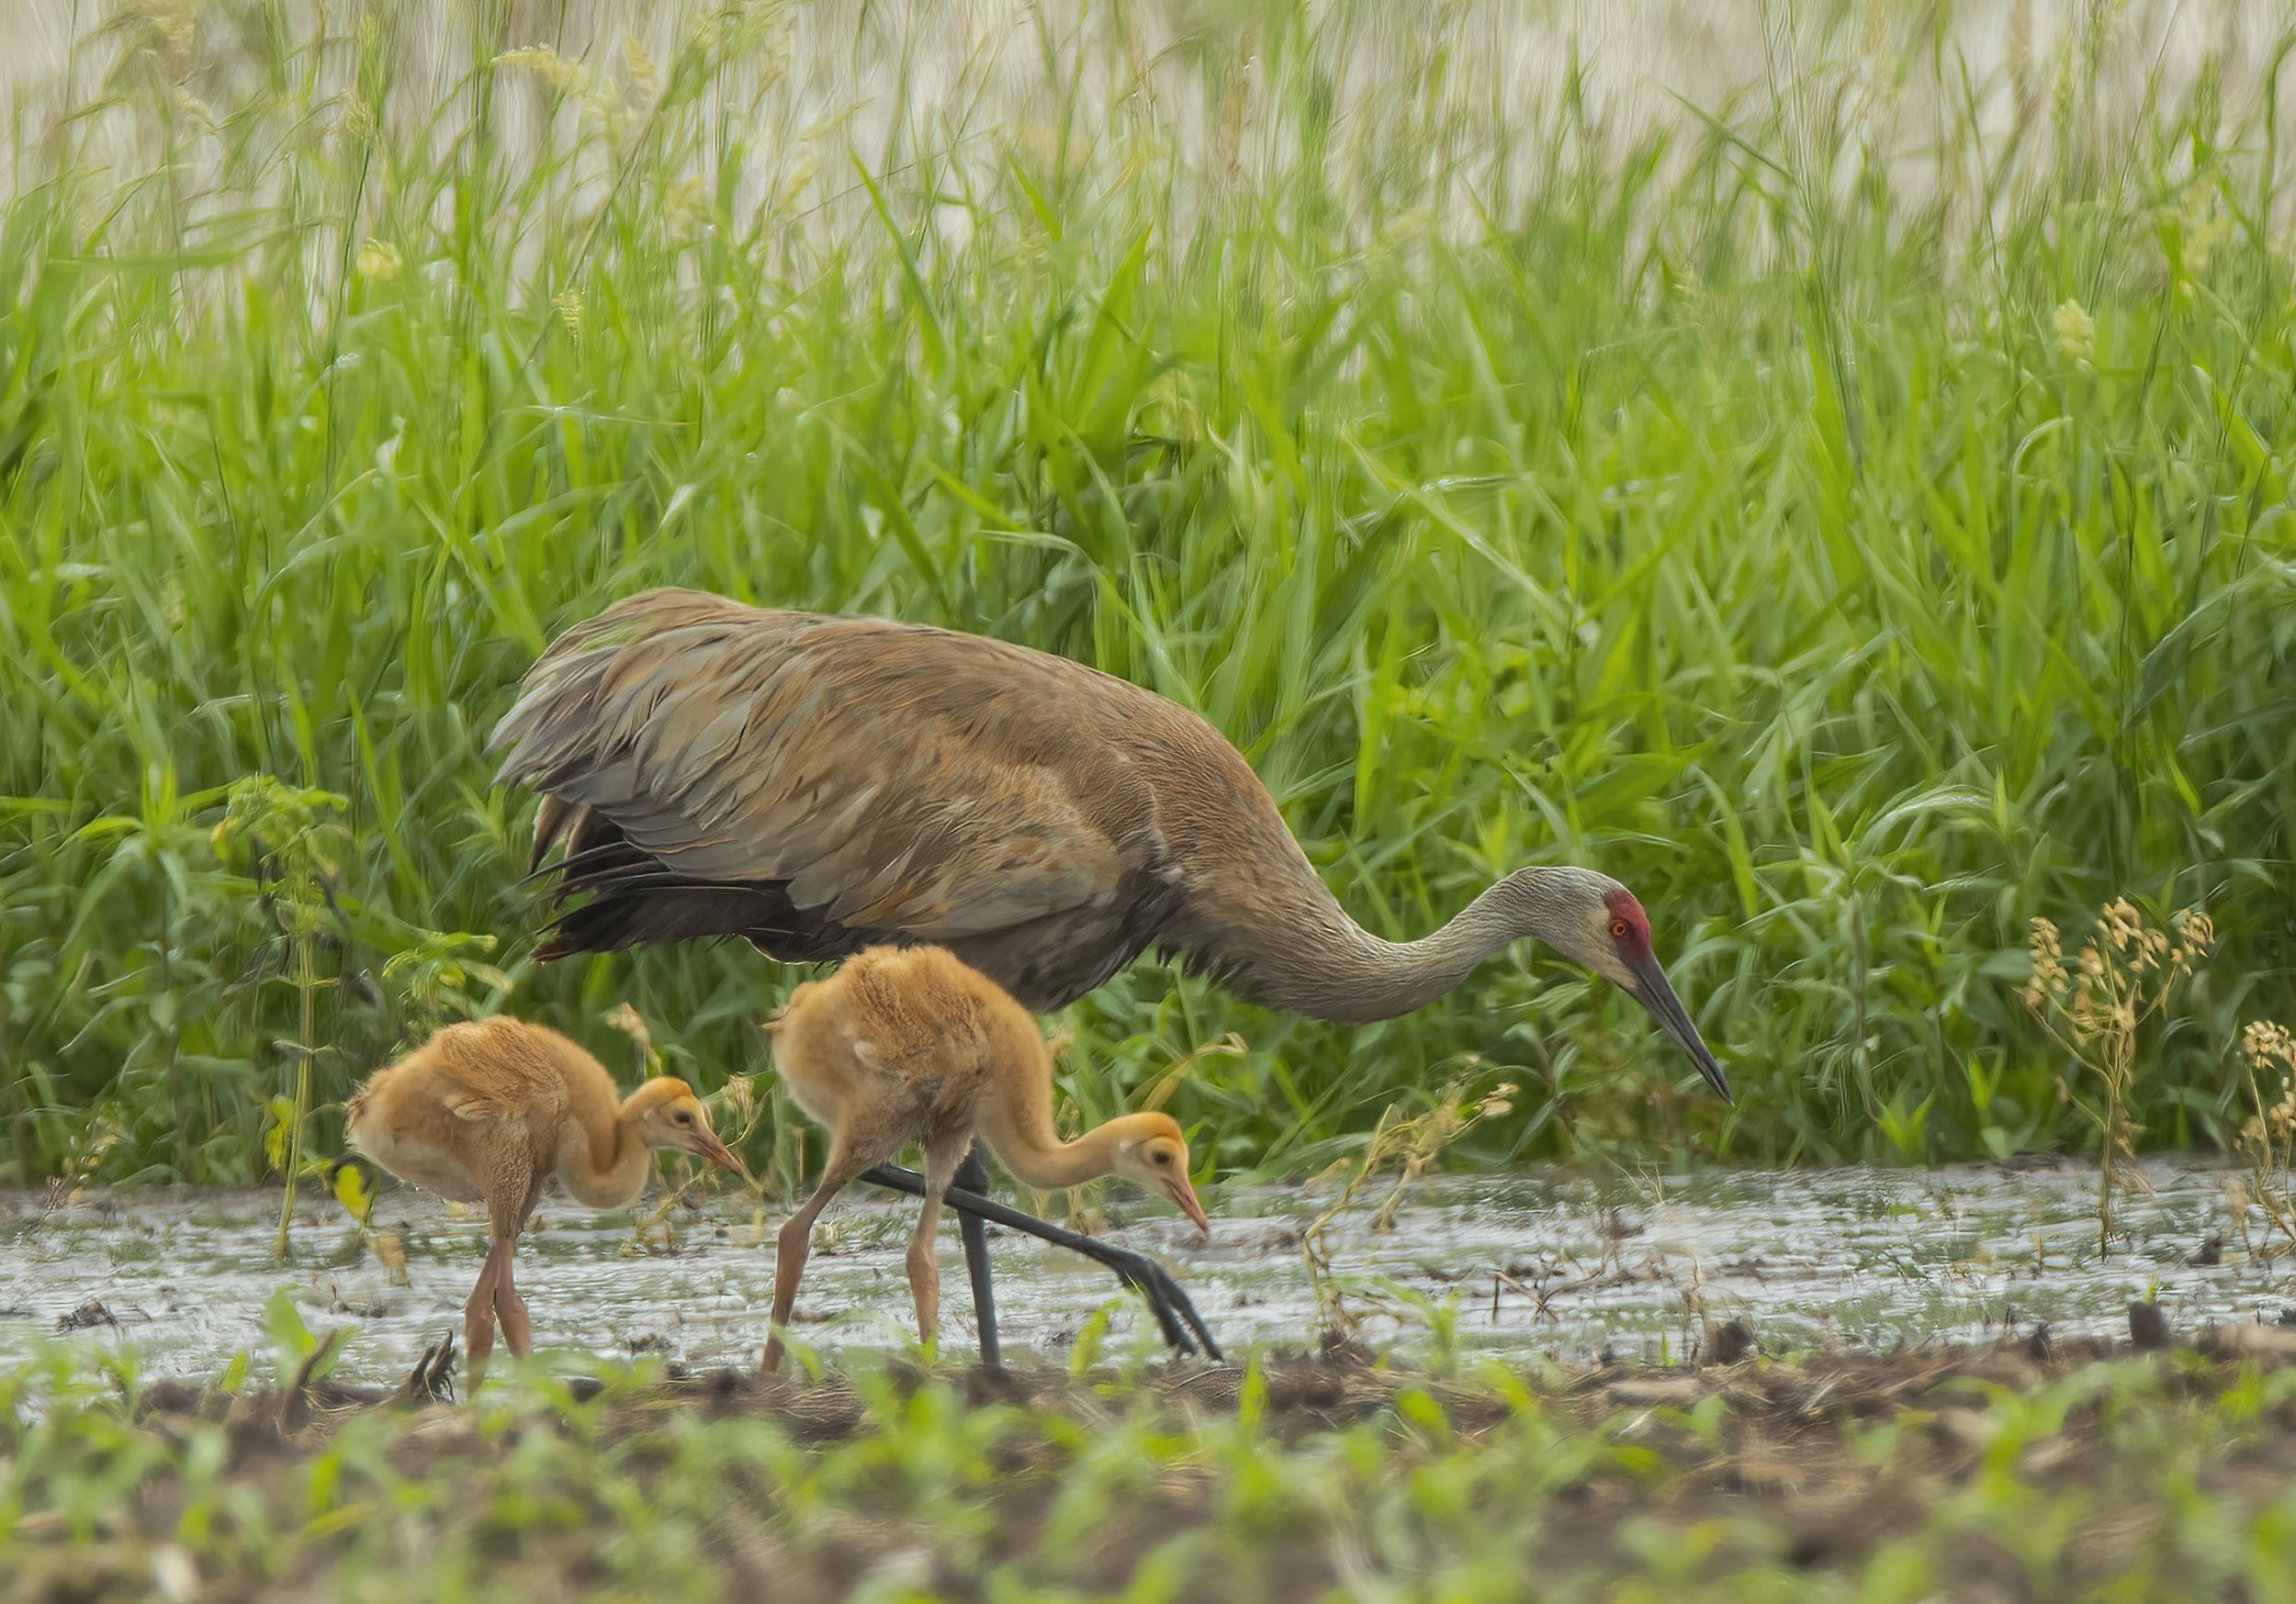 A Sandhill Crane and two colts. Photo by Ty Smedes